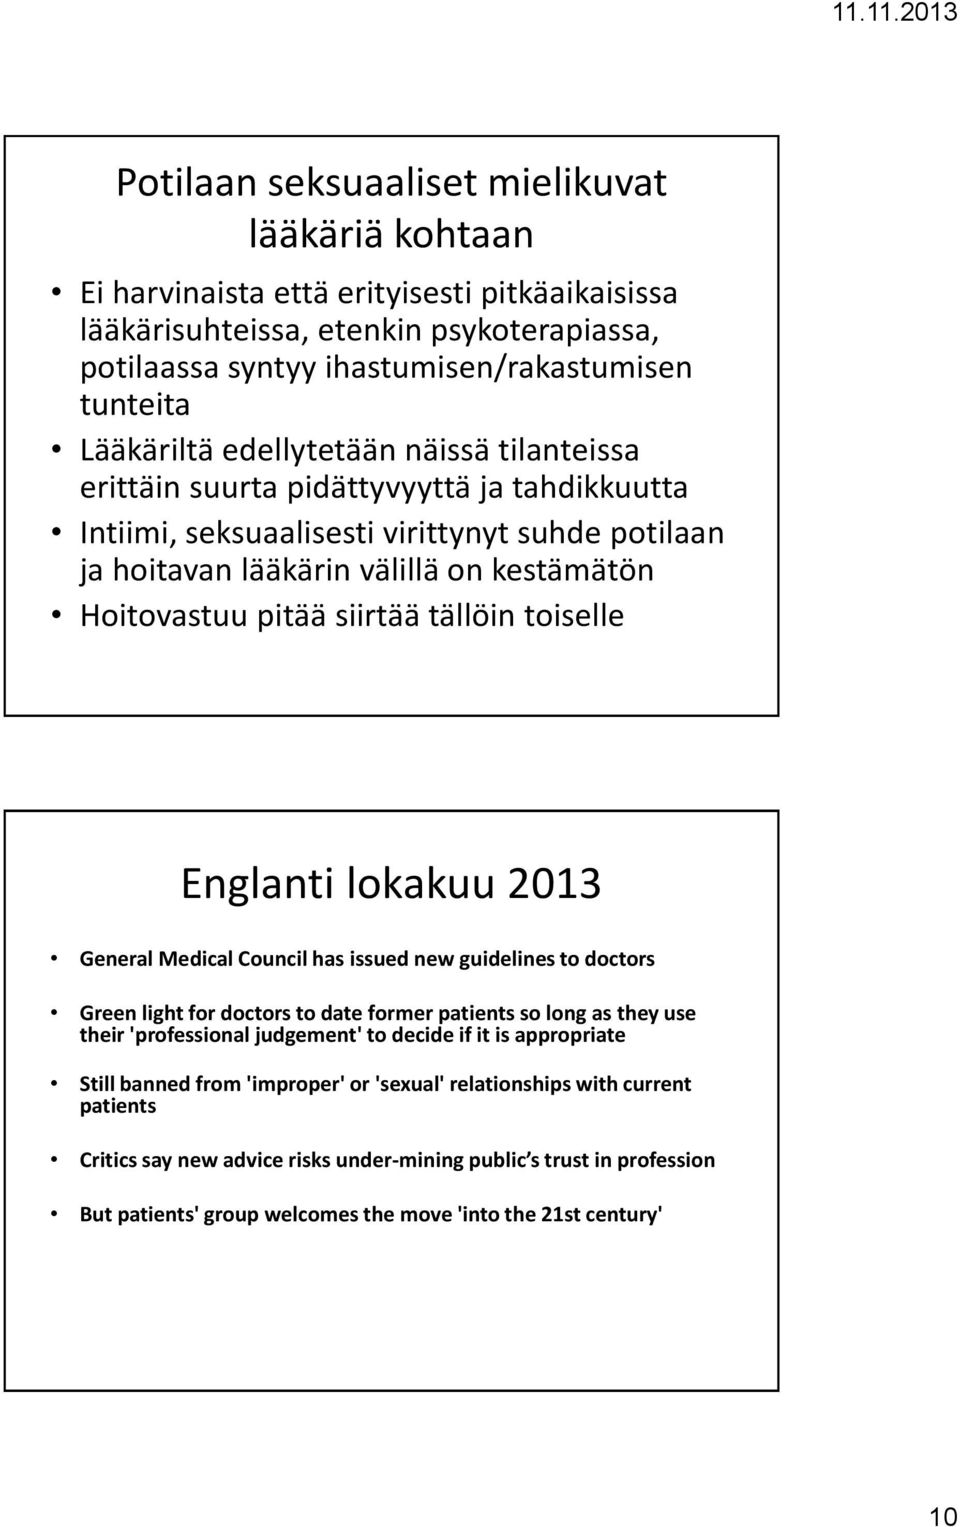 siirtää tällöin toiselle Englanti lokakuu 2013 General Medical Council has issued new guidelines to doctors Green light for doctors to date former patients so long as they use their 'professional